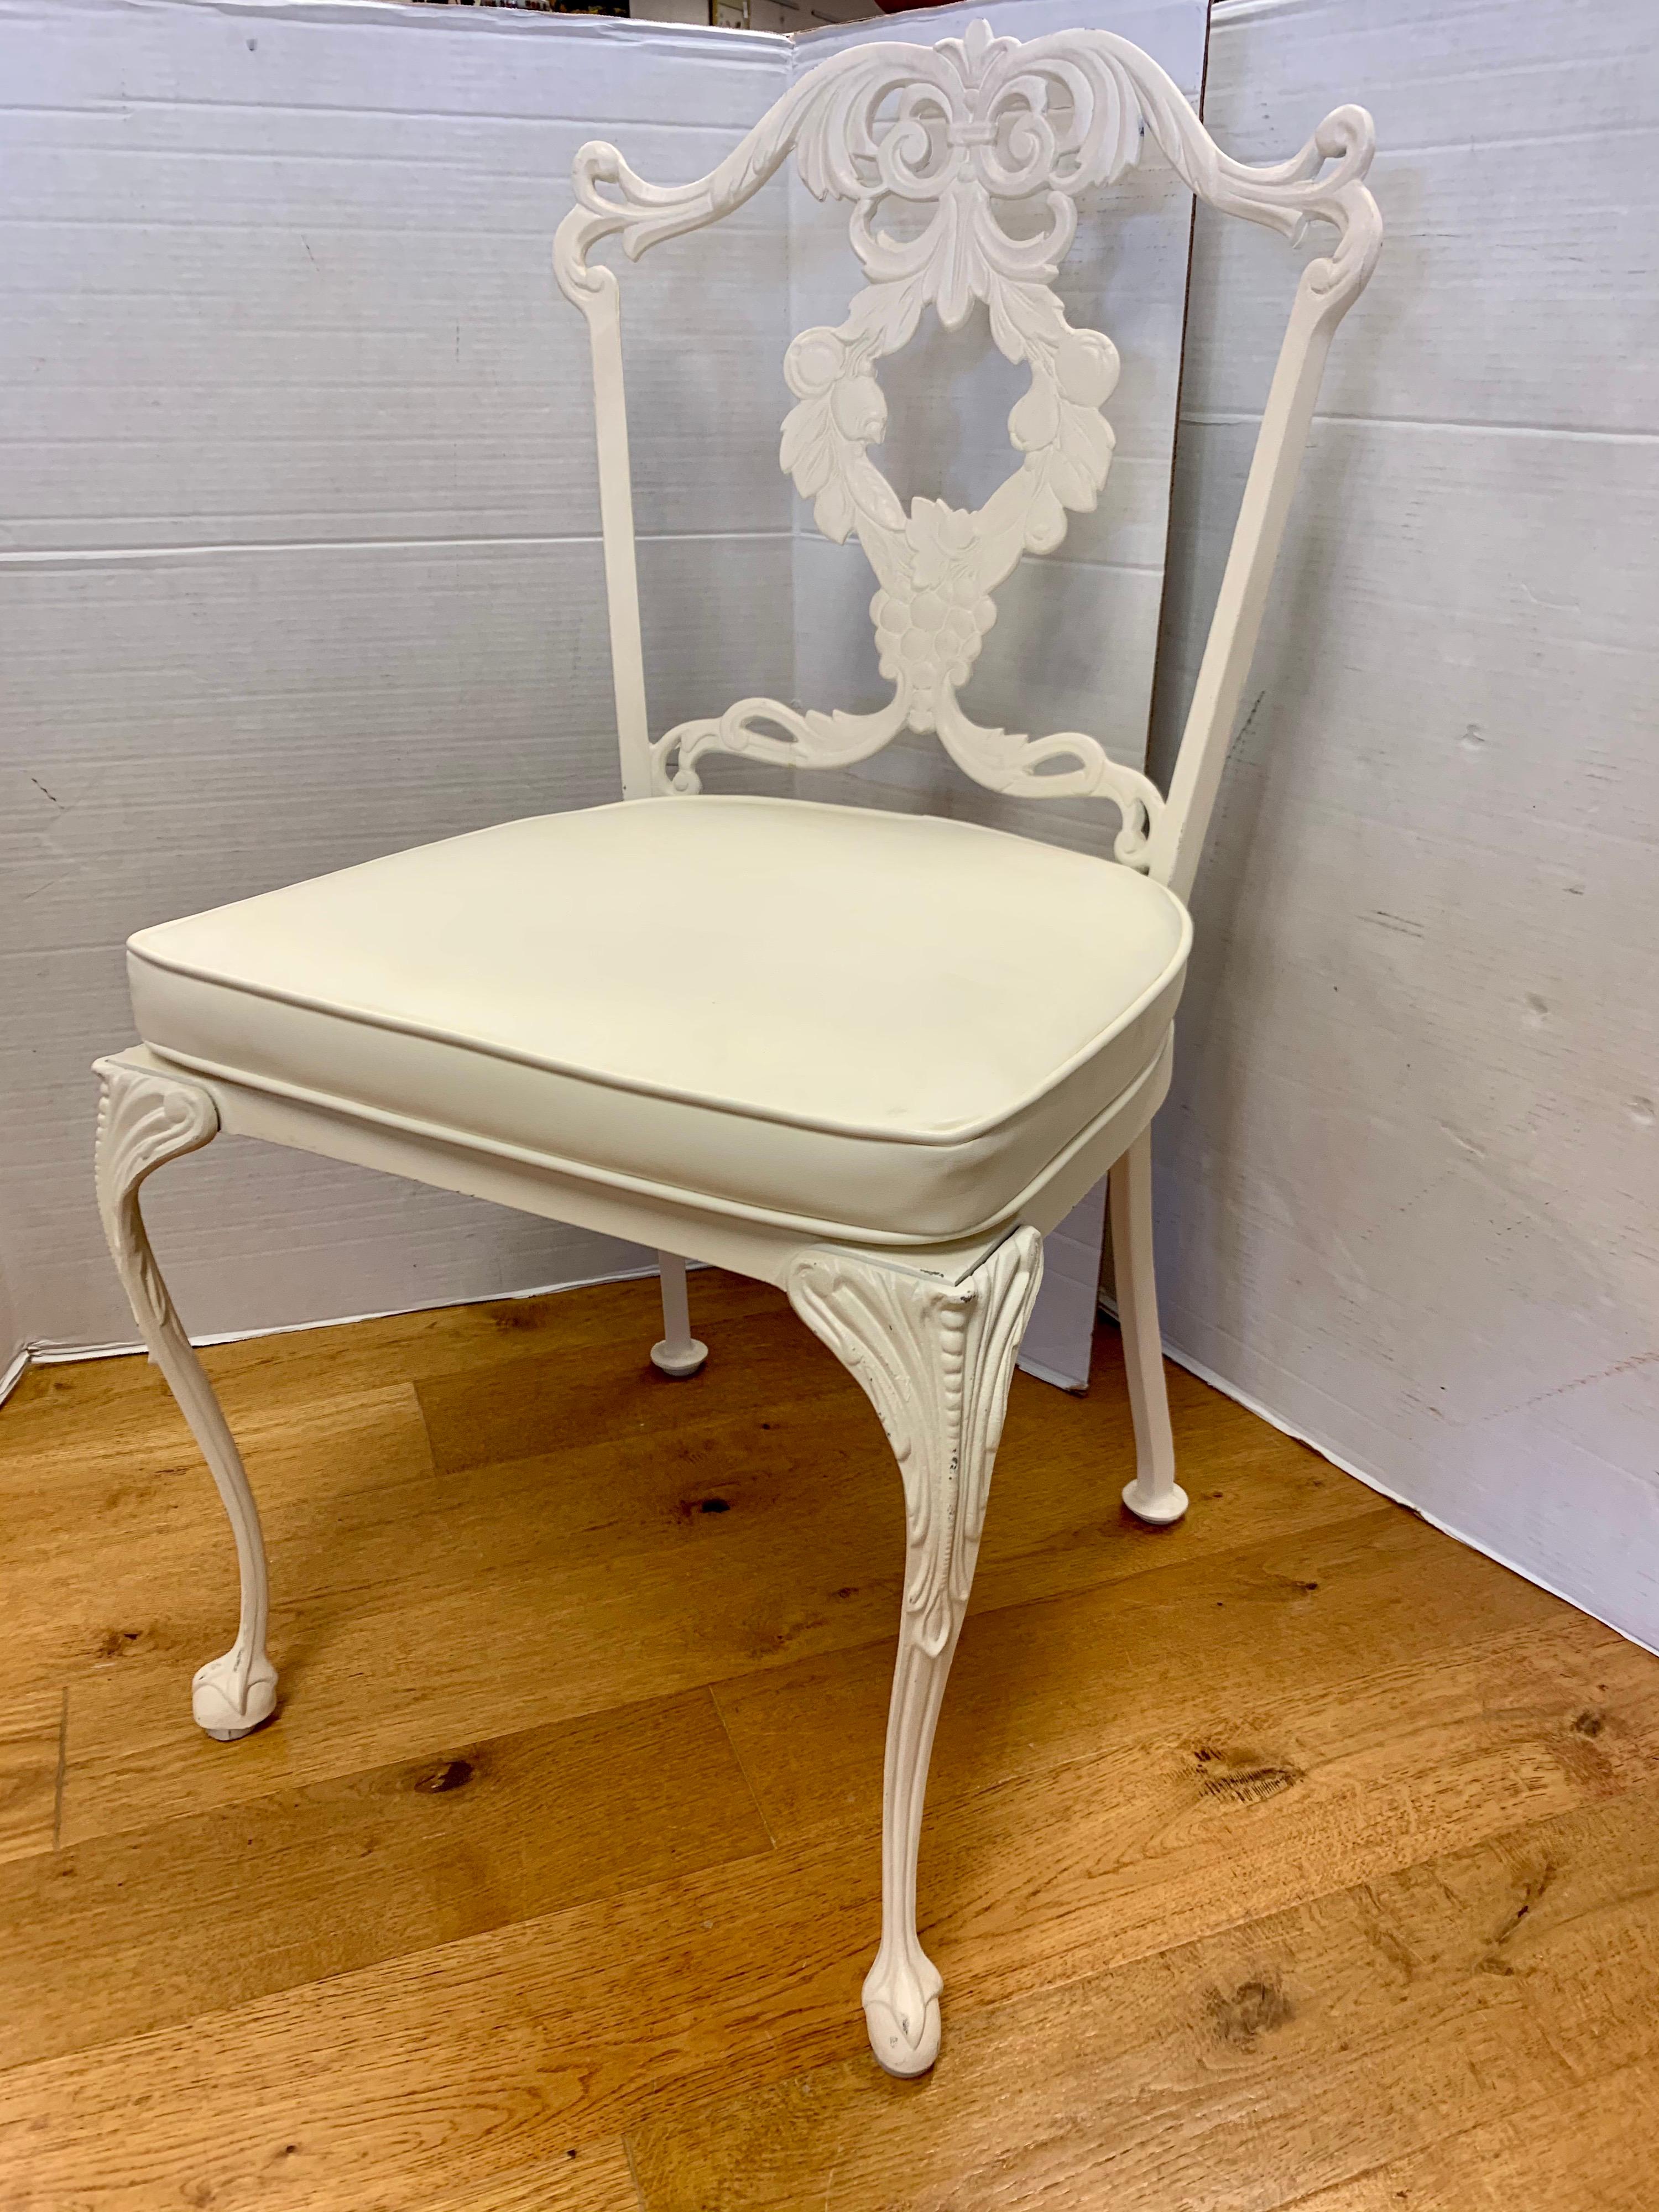 Single cast aluminum and white enameled French regency style dining chair. Fresh white enamel over finely cast aluminum for which Molla was renowned. Ultra rare. Now, more than ever, home is where the heart is.